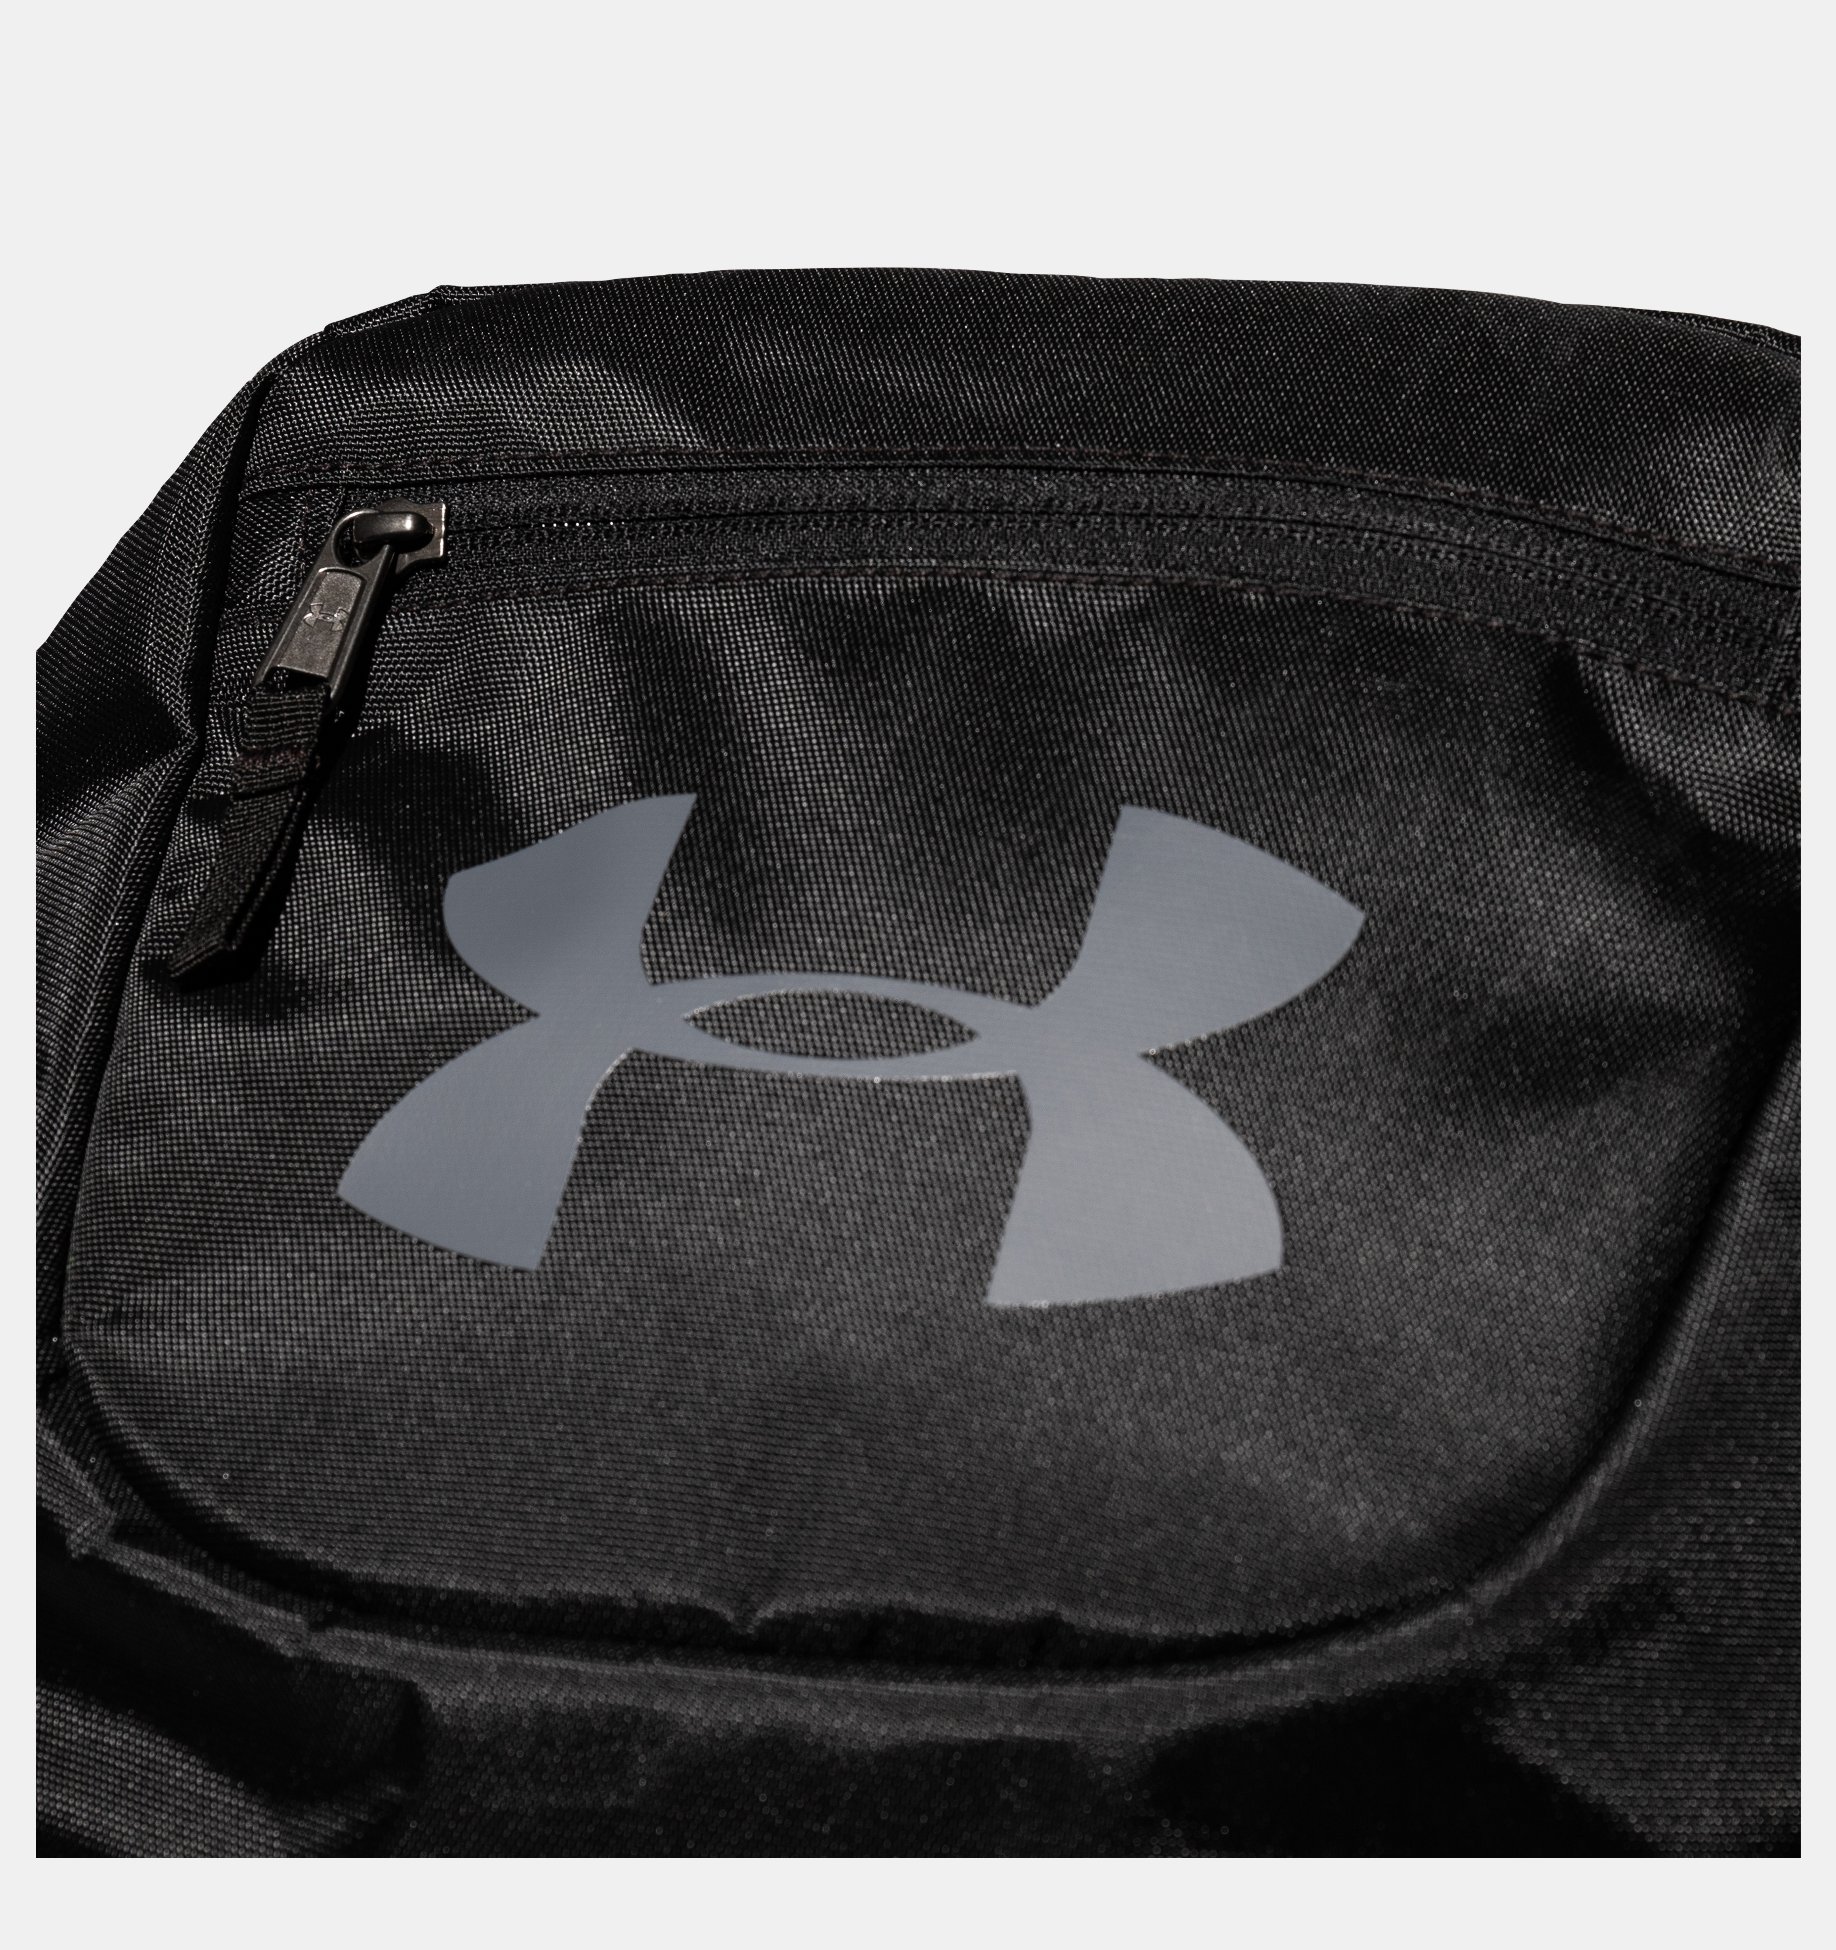 Under Armour SC30 Undeniable Backpack 